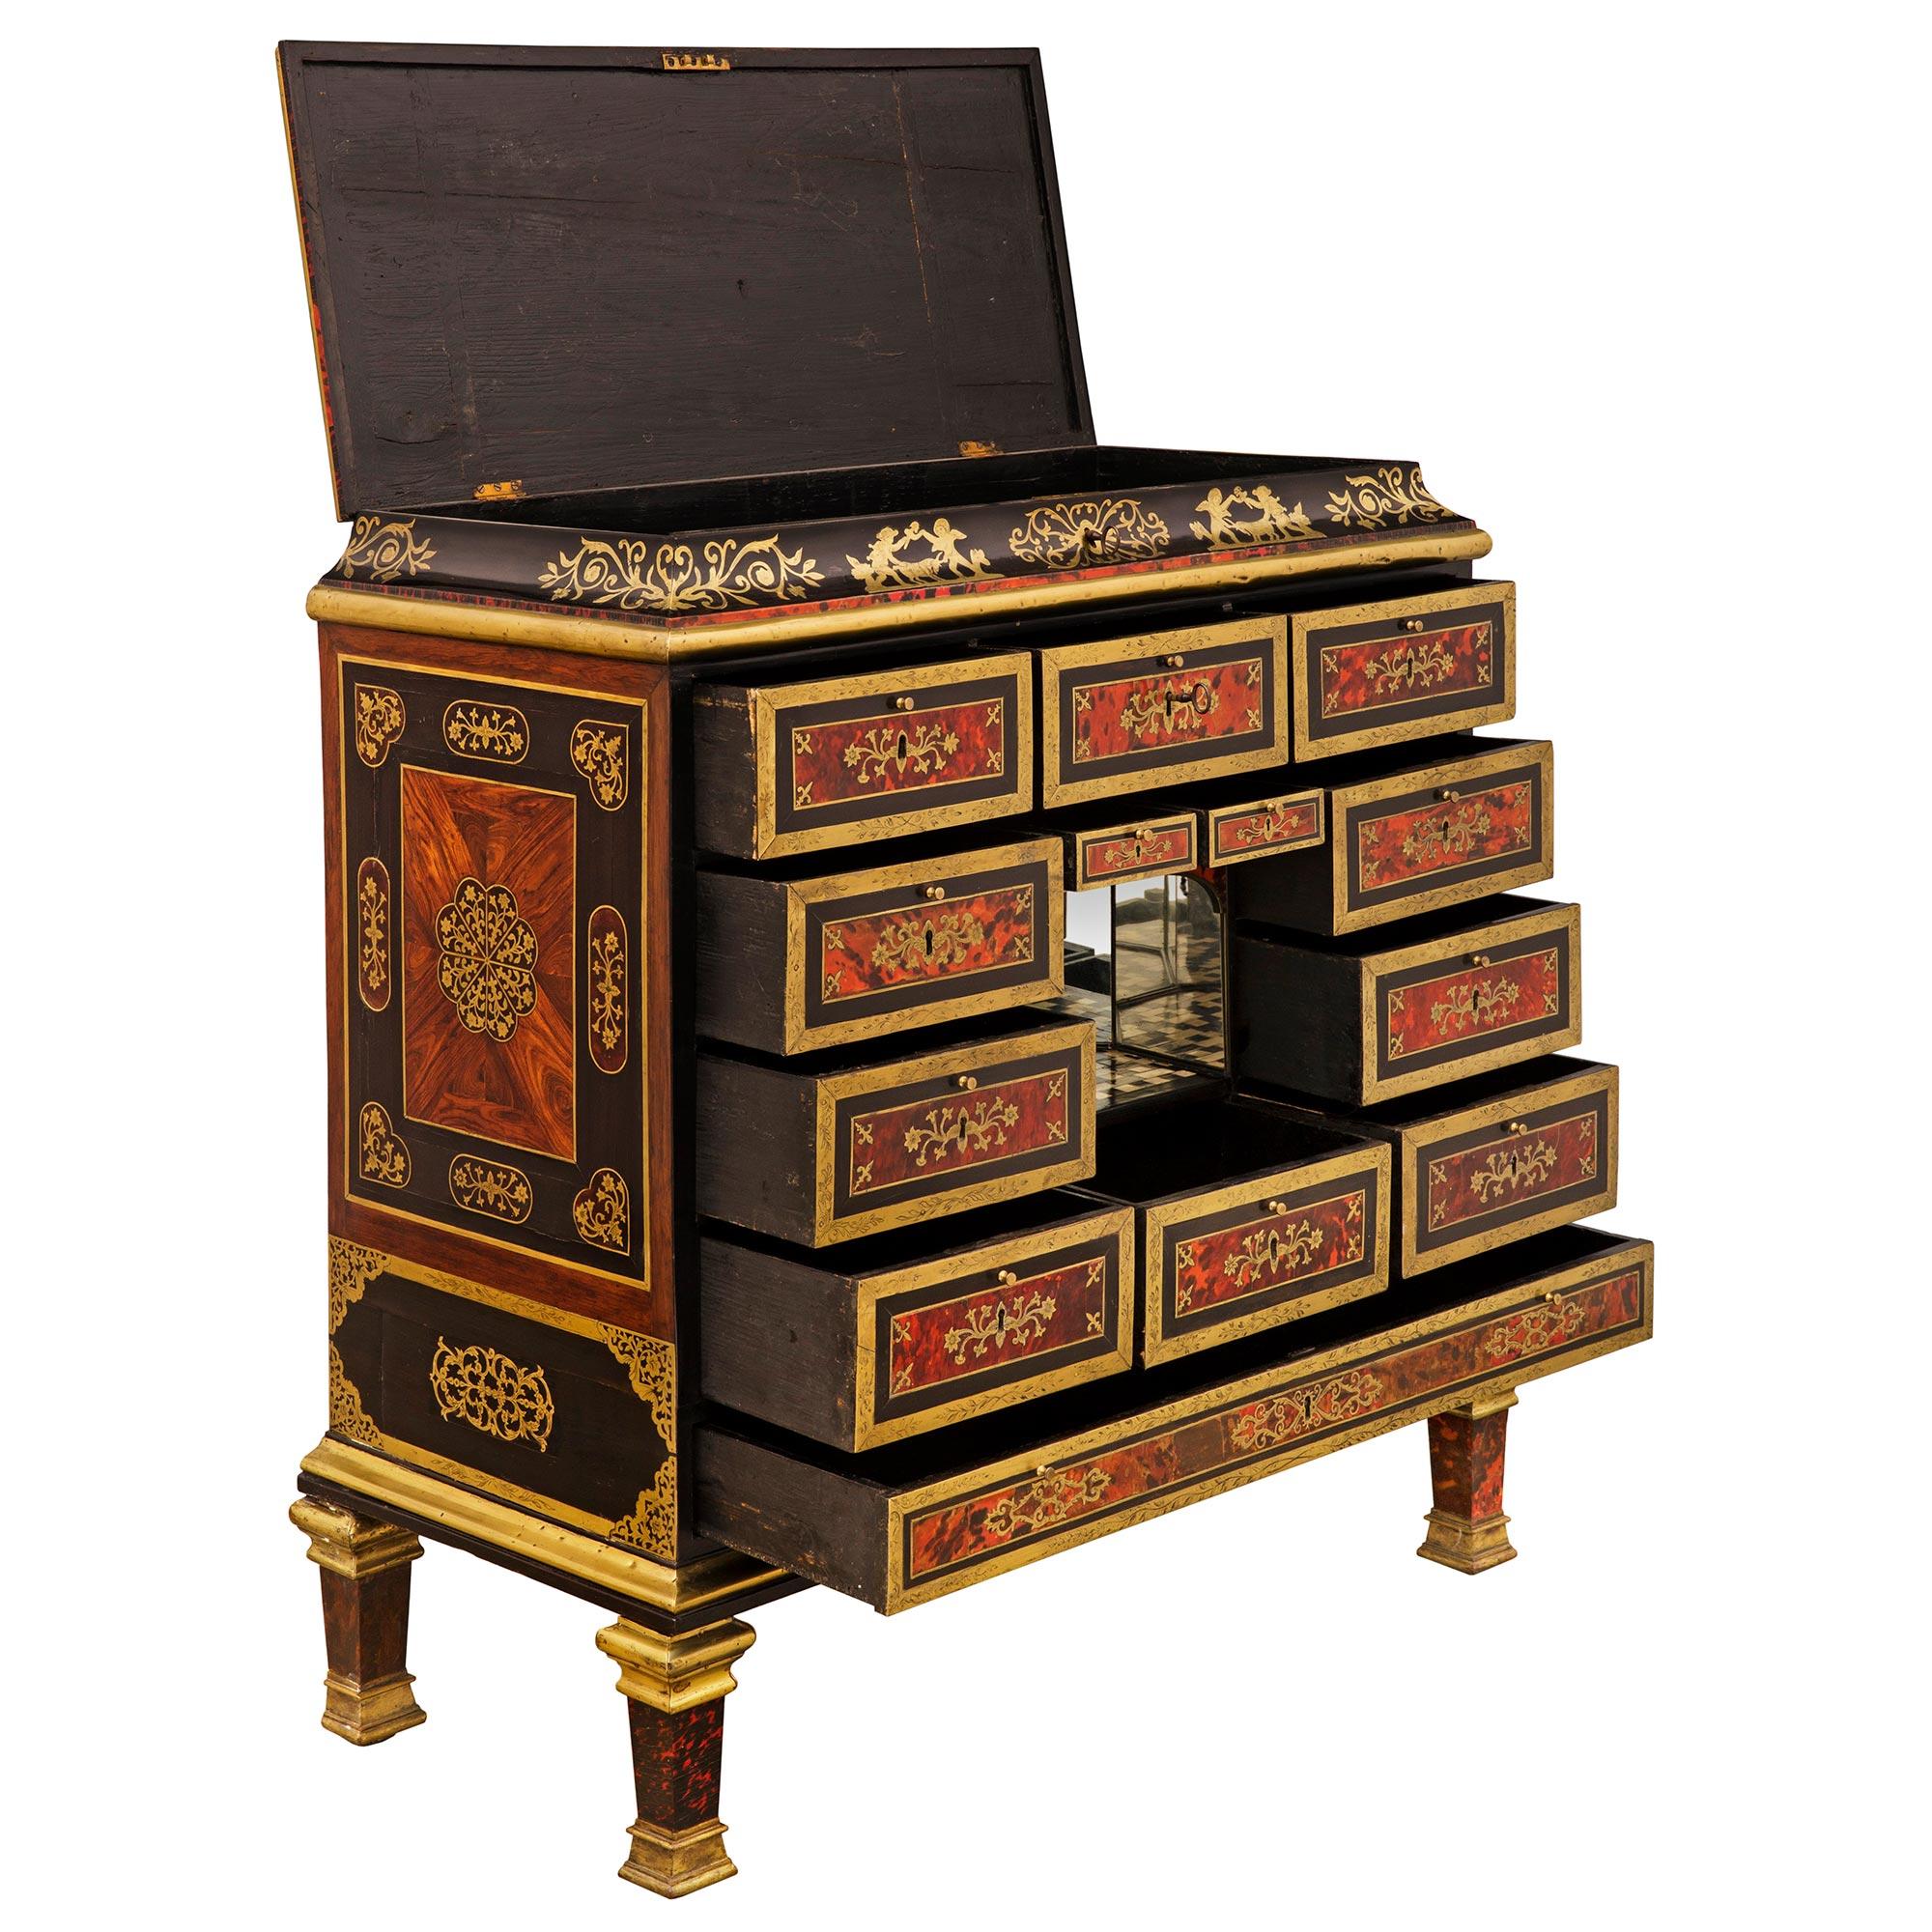 French 18th Century Louis XIV Period Boulle Specimen Cabinet In Good Condition For Sale In West Palm Beach, FL